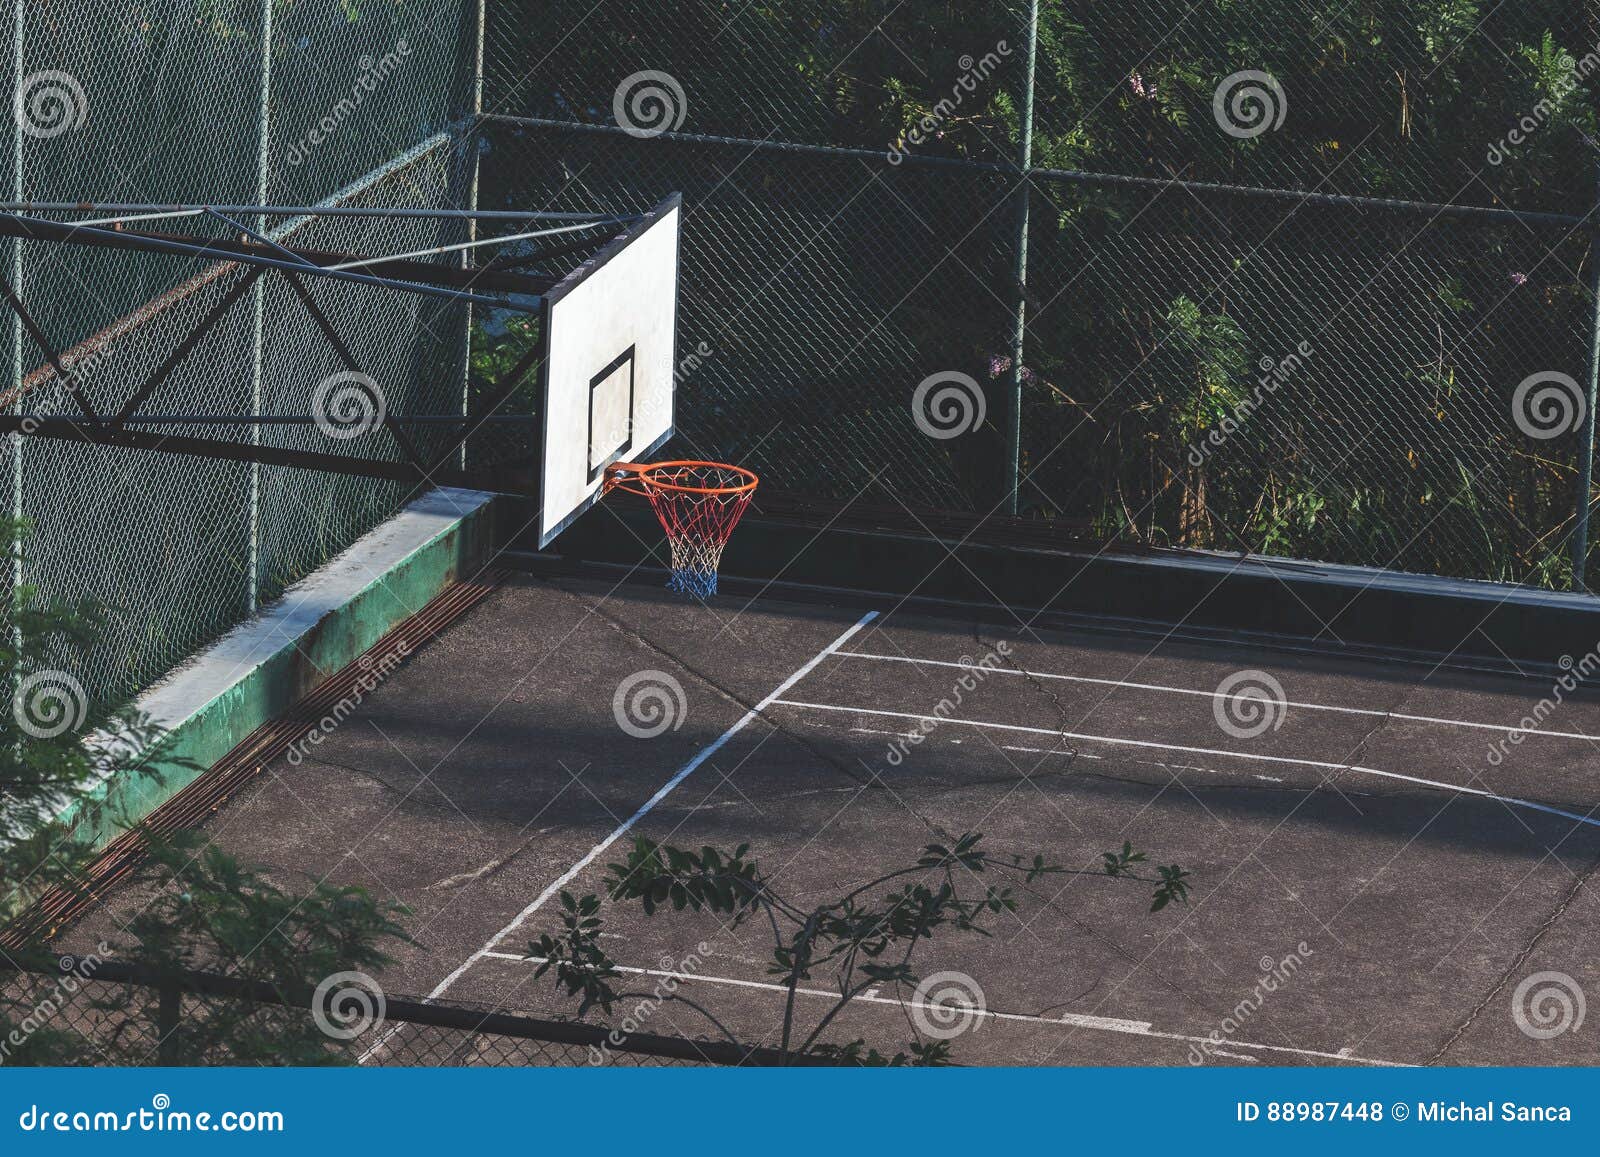 Basketball Court In City. Outdoor Playground Stock Photo - Image of